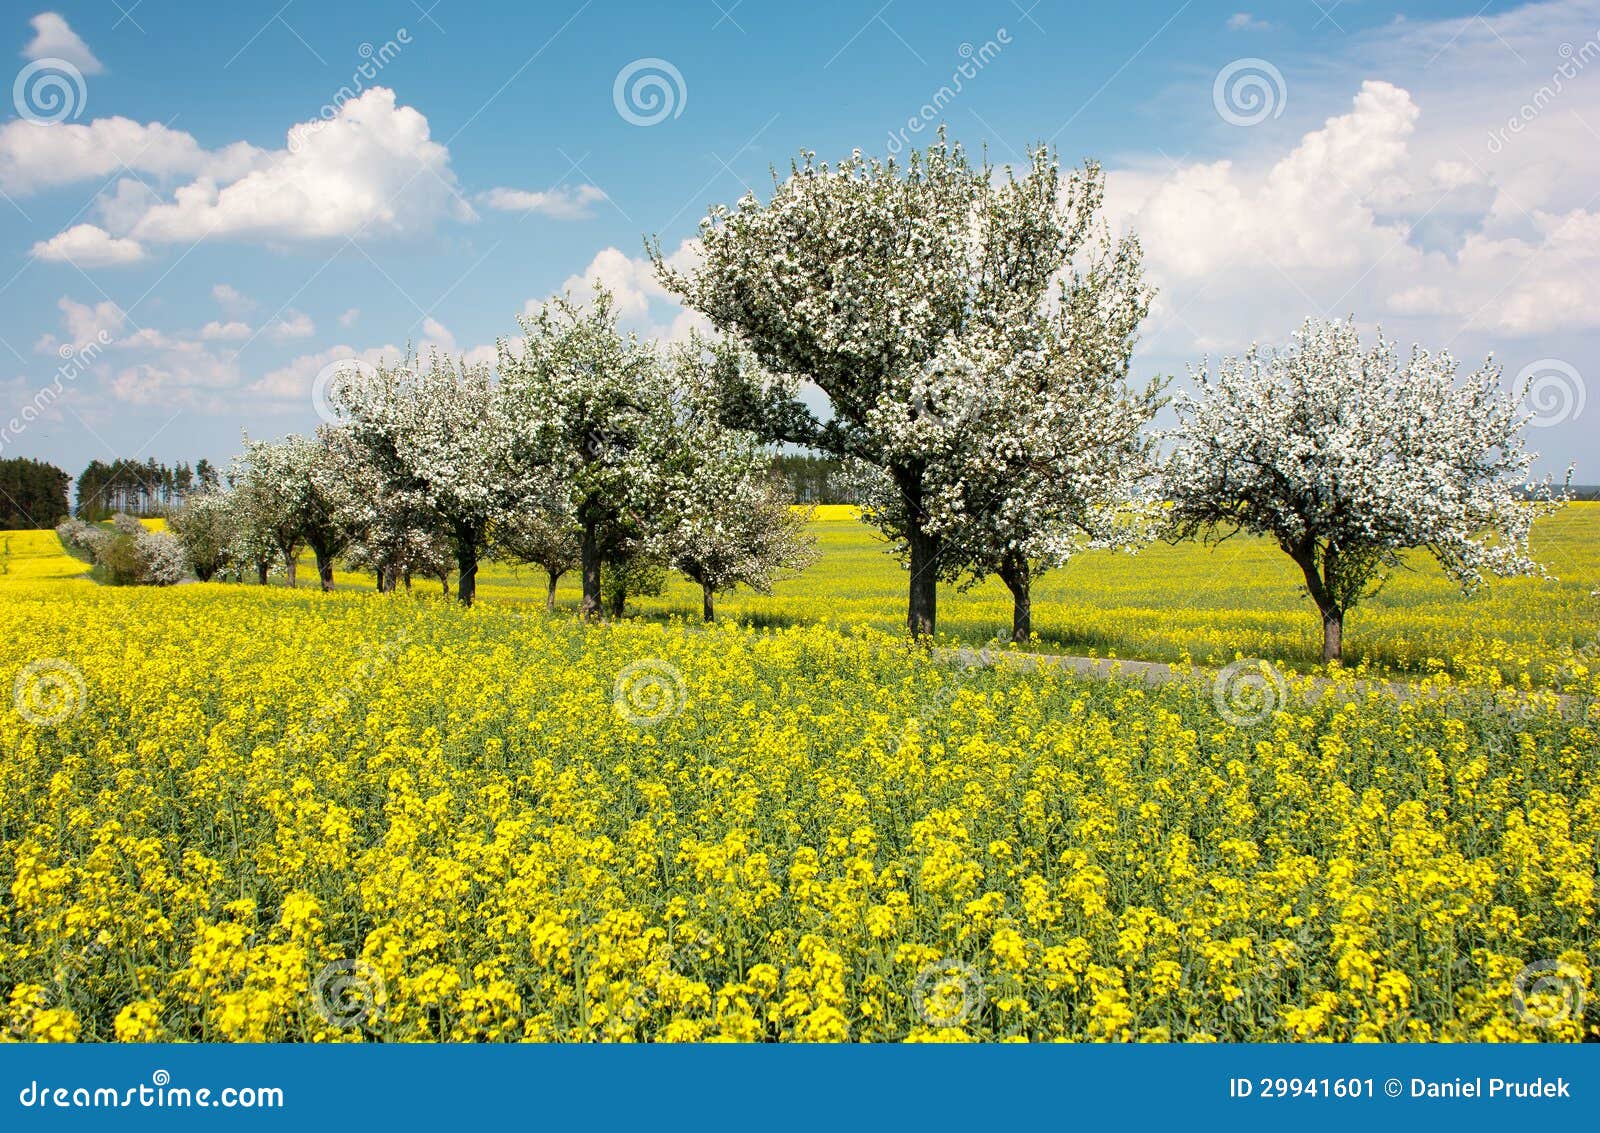 springtime beautiful view of rapeseed field, alley of apple tree